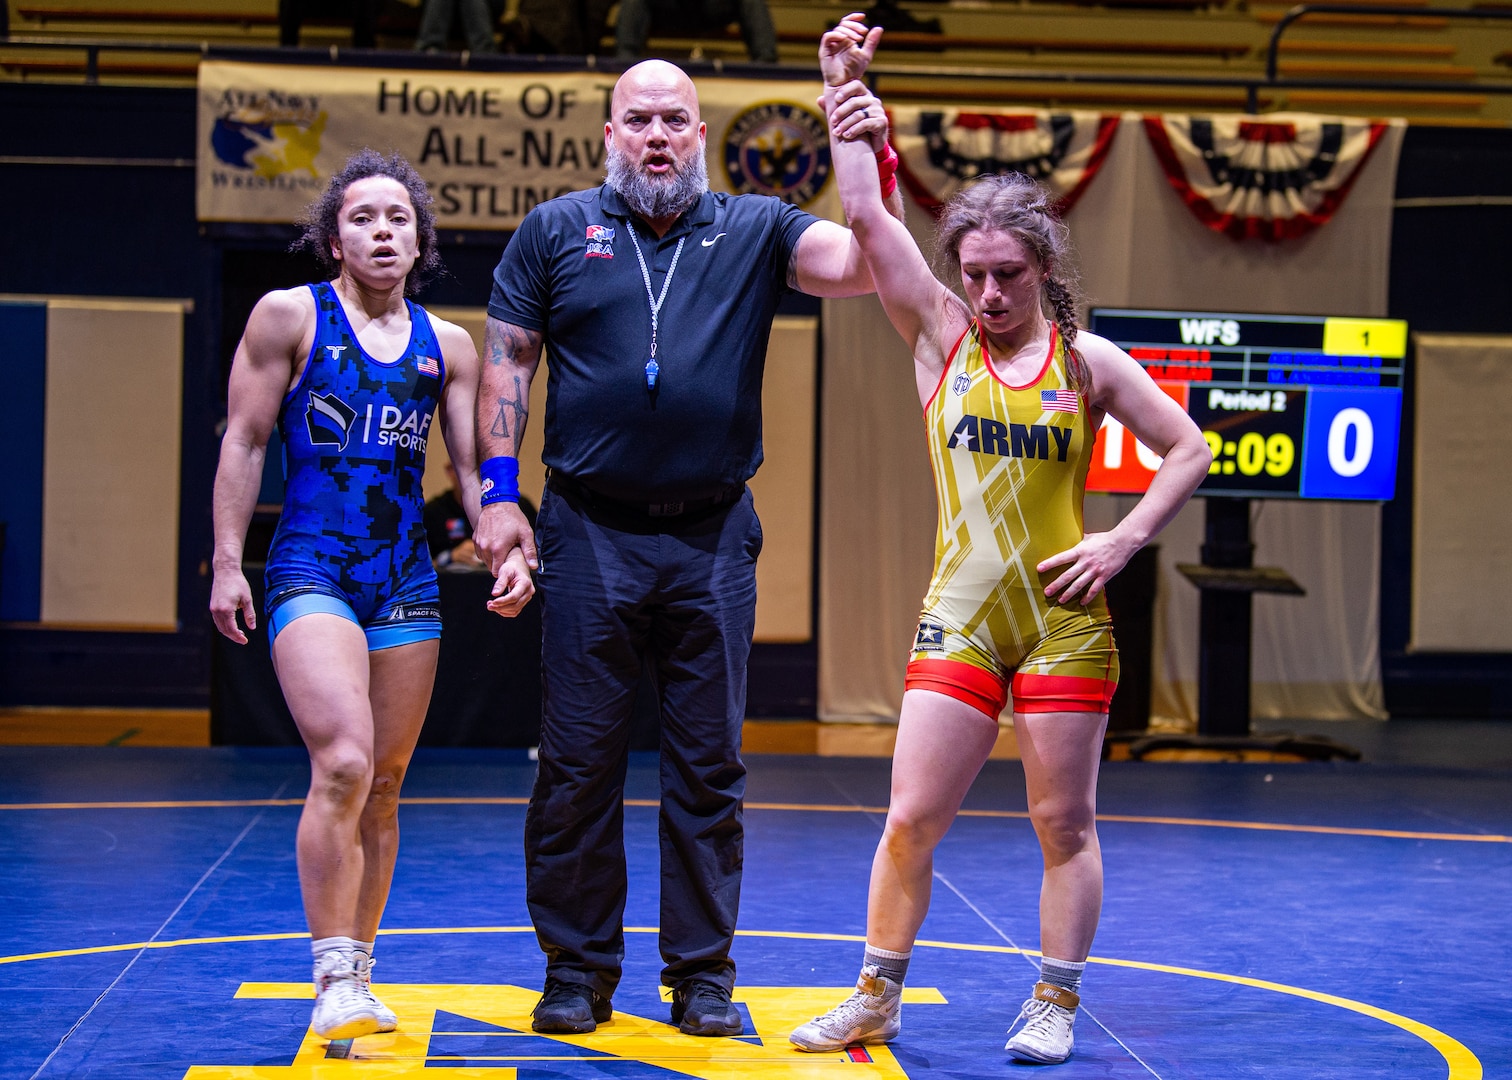 BREMERTON, WA (Feb. 24, 2023) - Army Spc. Aleeah Gould of Fort Carson, Colo.  tech. falls Air Force Senior Airman Mariah Anderson of Sheppard AFB, Texas 10-0 during the Women's Freestyle competition of the 2023 Armed Forces Wrestling Championship held at Naval Base Kitsap, Bremerton, Washington from February 25-26. This year’s championship features teams from the Army, Navy (including the Marine Corps and Coast Guard Wrestlers), and Air Force (including Space Force Wrestlers). Teams compete in Men’s Greco-Roman, Men’s Freestyle, and Women’s Freestyle wrestling styles. (Photo by Petty Officer 1st Class Ian Carver).